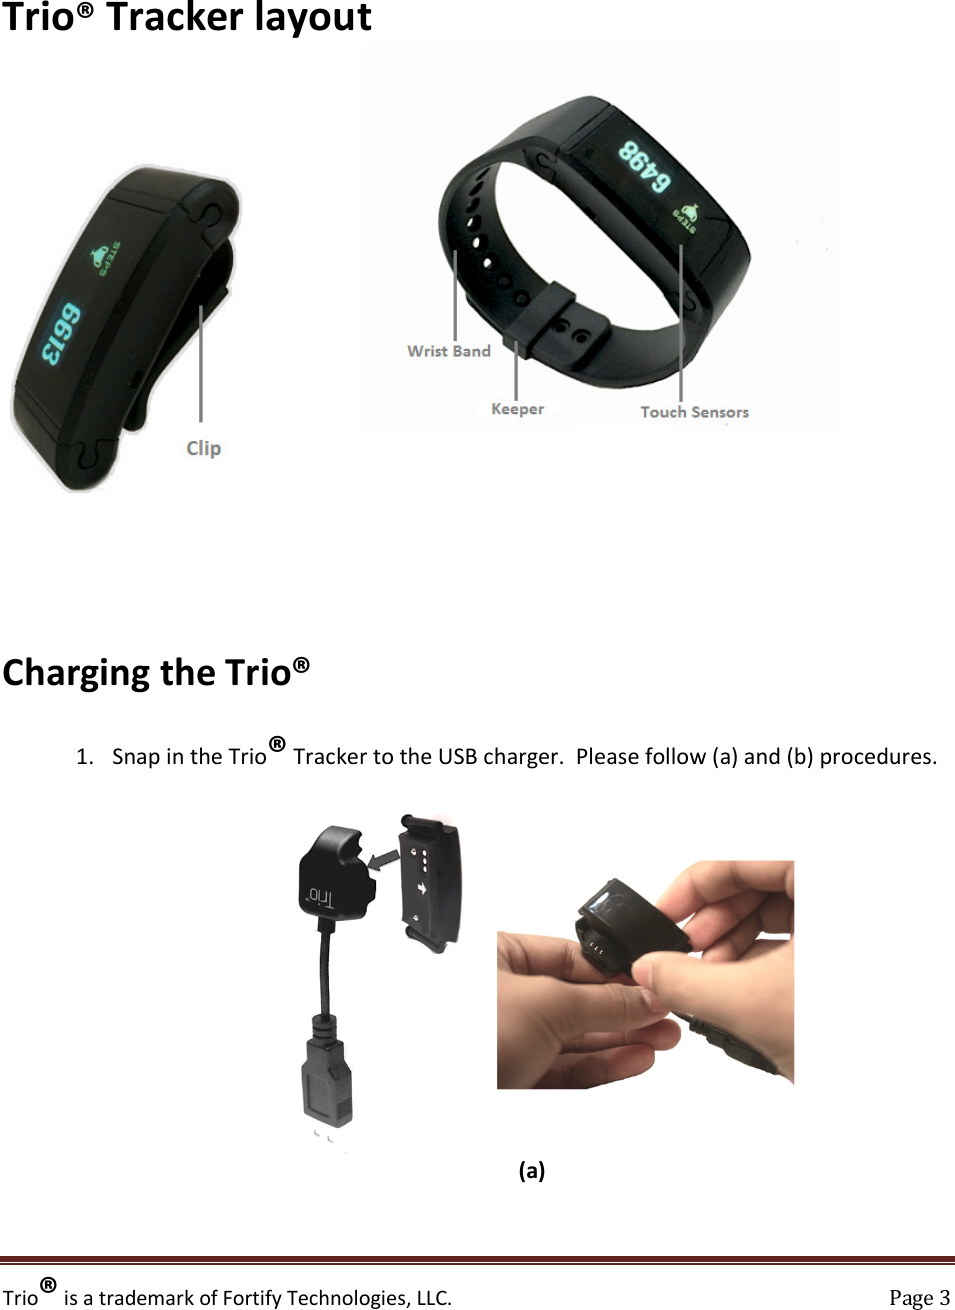 Trio® is a trademark of Fortify Technologies, LLC.    Page 3  Trio® Tracker layout                                 Charging the Trio®  1. Snap in the Trio® Tracker to the USB charger.  Please follow (a) and (b) procedures.   (a)   